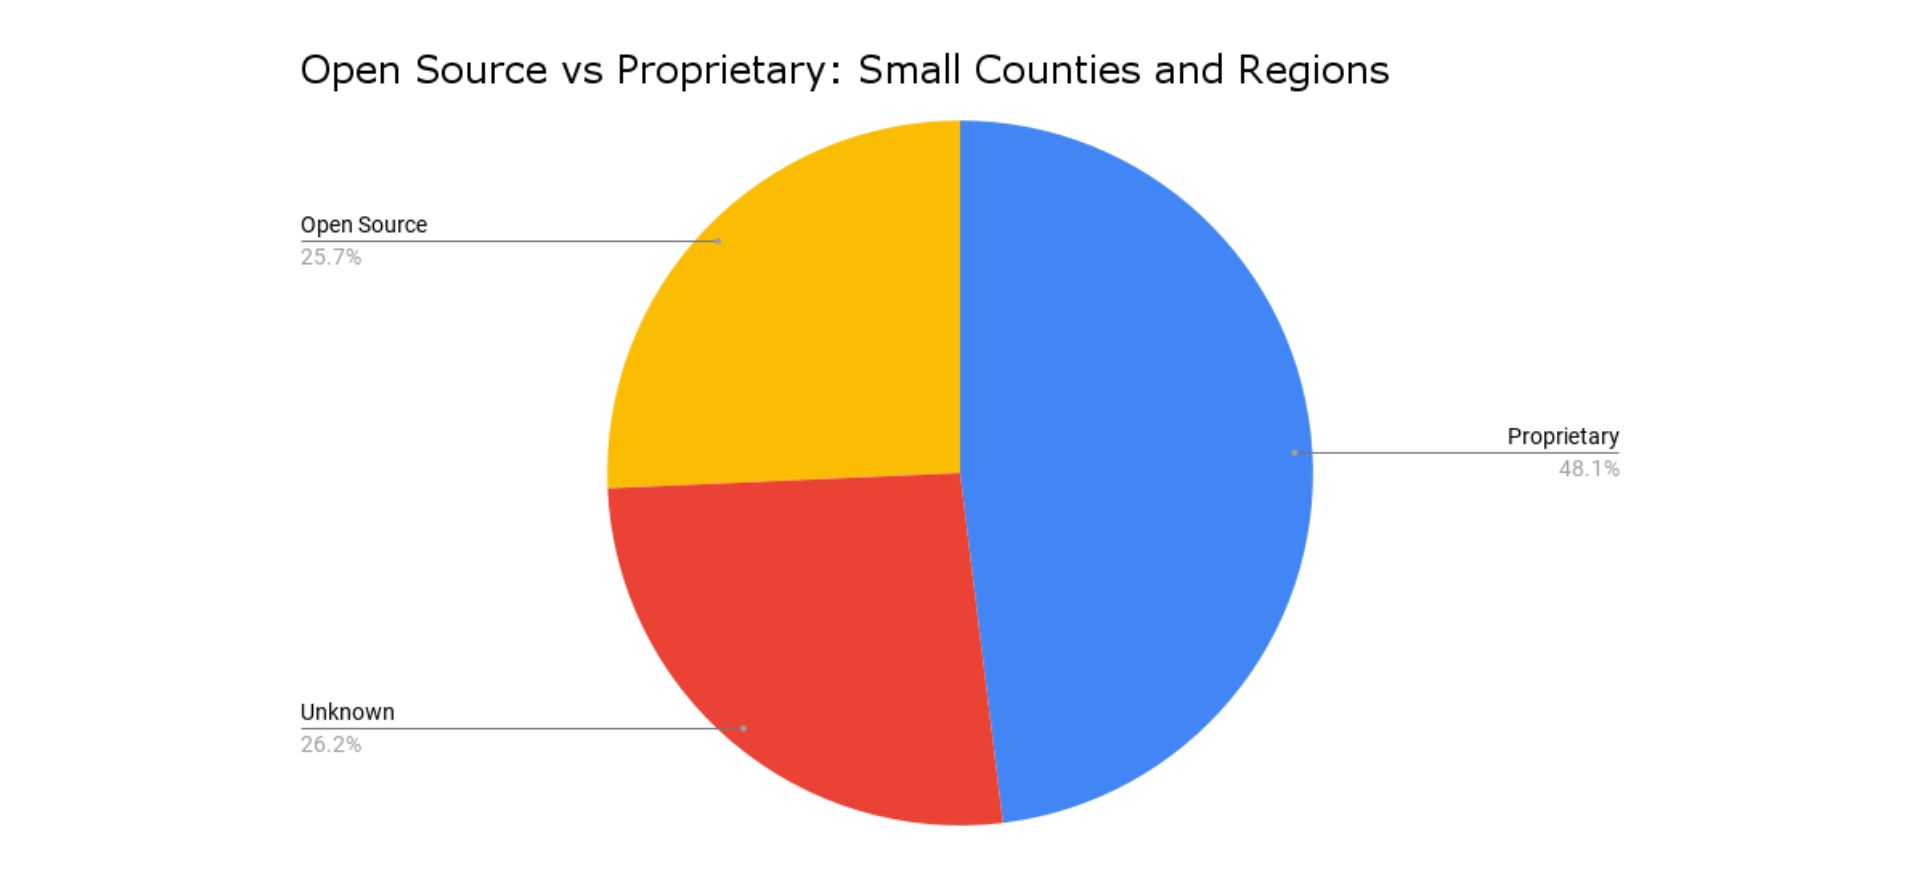 open source vs proprietary: small counties